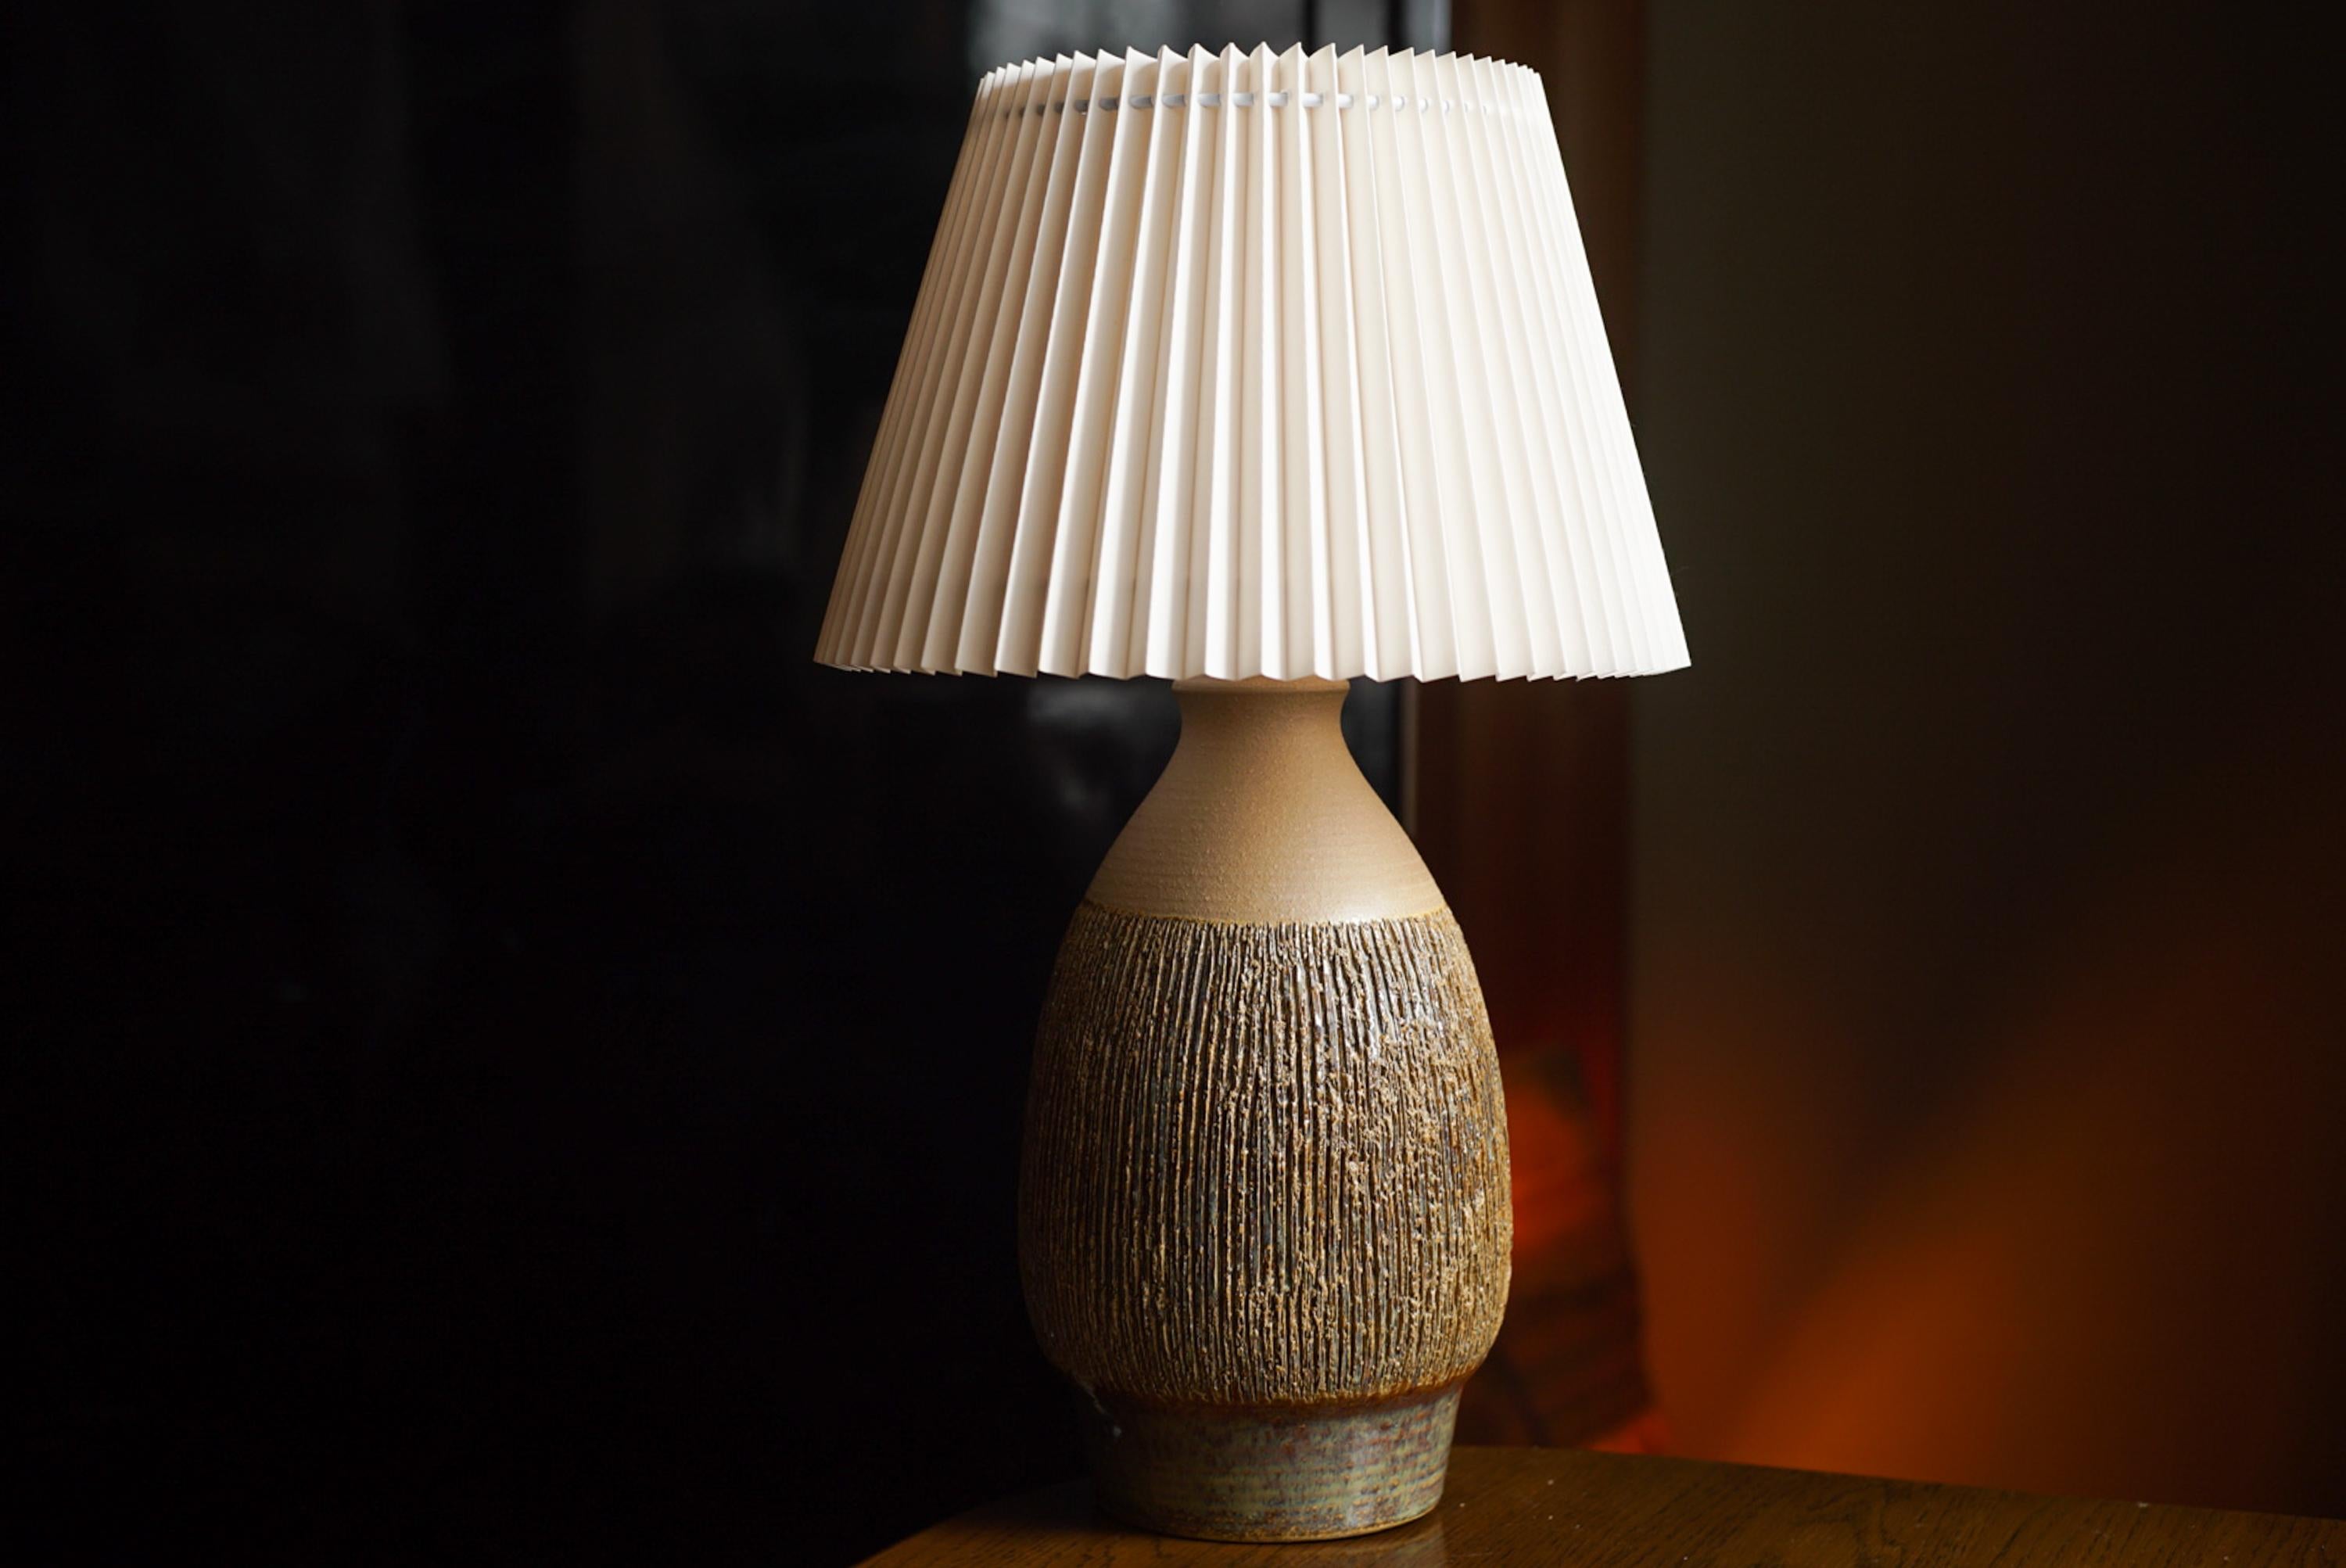 A stoneware table lamp handmade by SVEND AAGE JENSEN for Søholm located on the island of Bornholm in Denmark in the 1960s.

Stamped and signed on the base.

Sold without lampshade. Height includes socket. fully functional and in beautiful